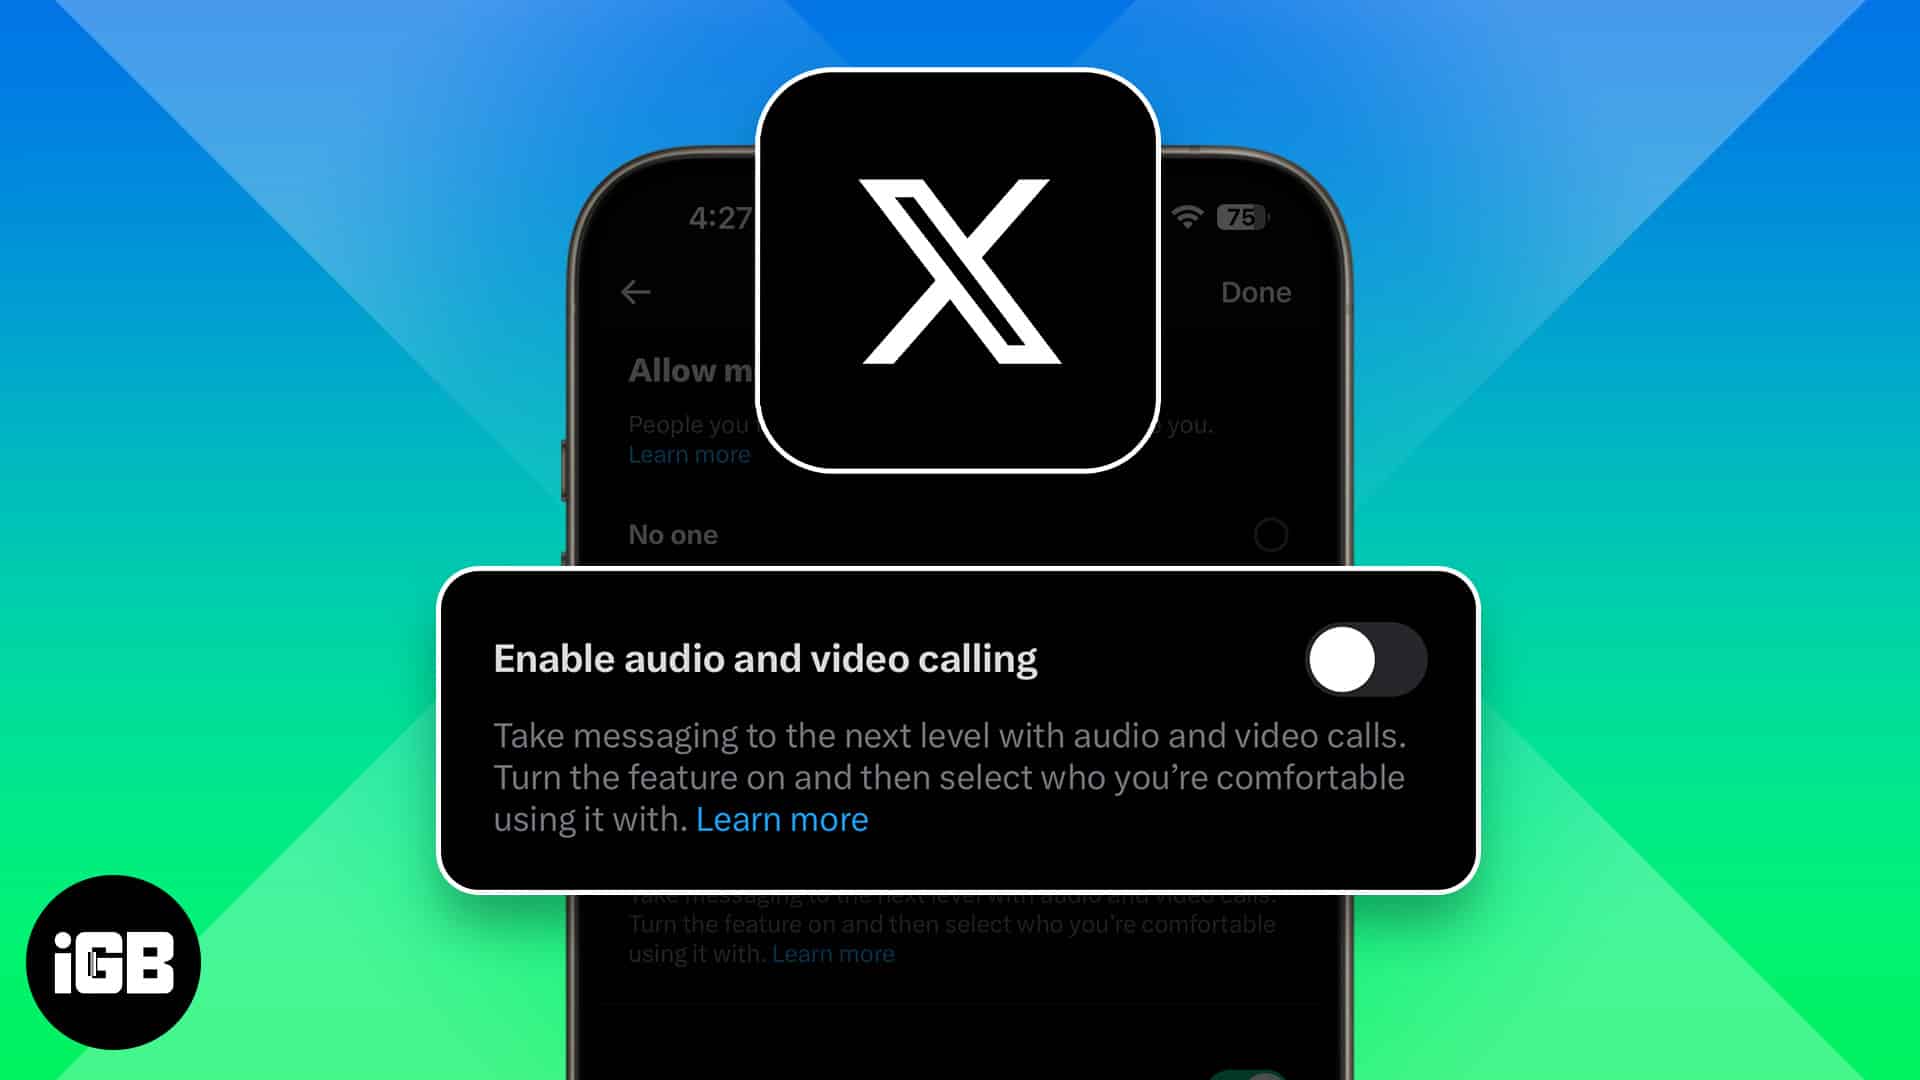 How to turn off audio and video calls in X on iPhone